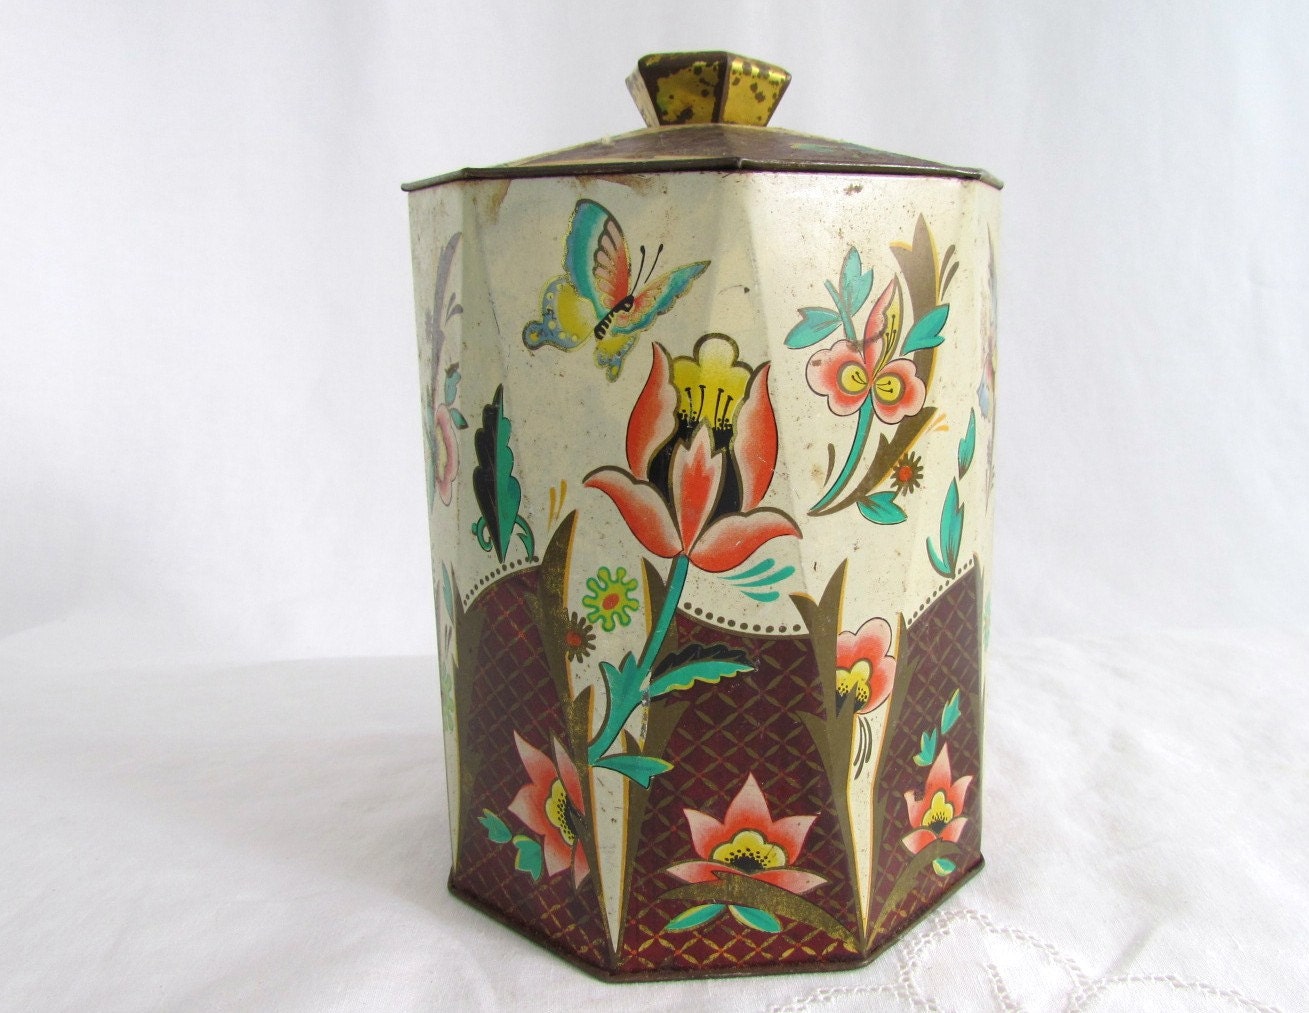 Crown Container